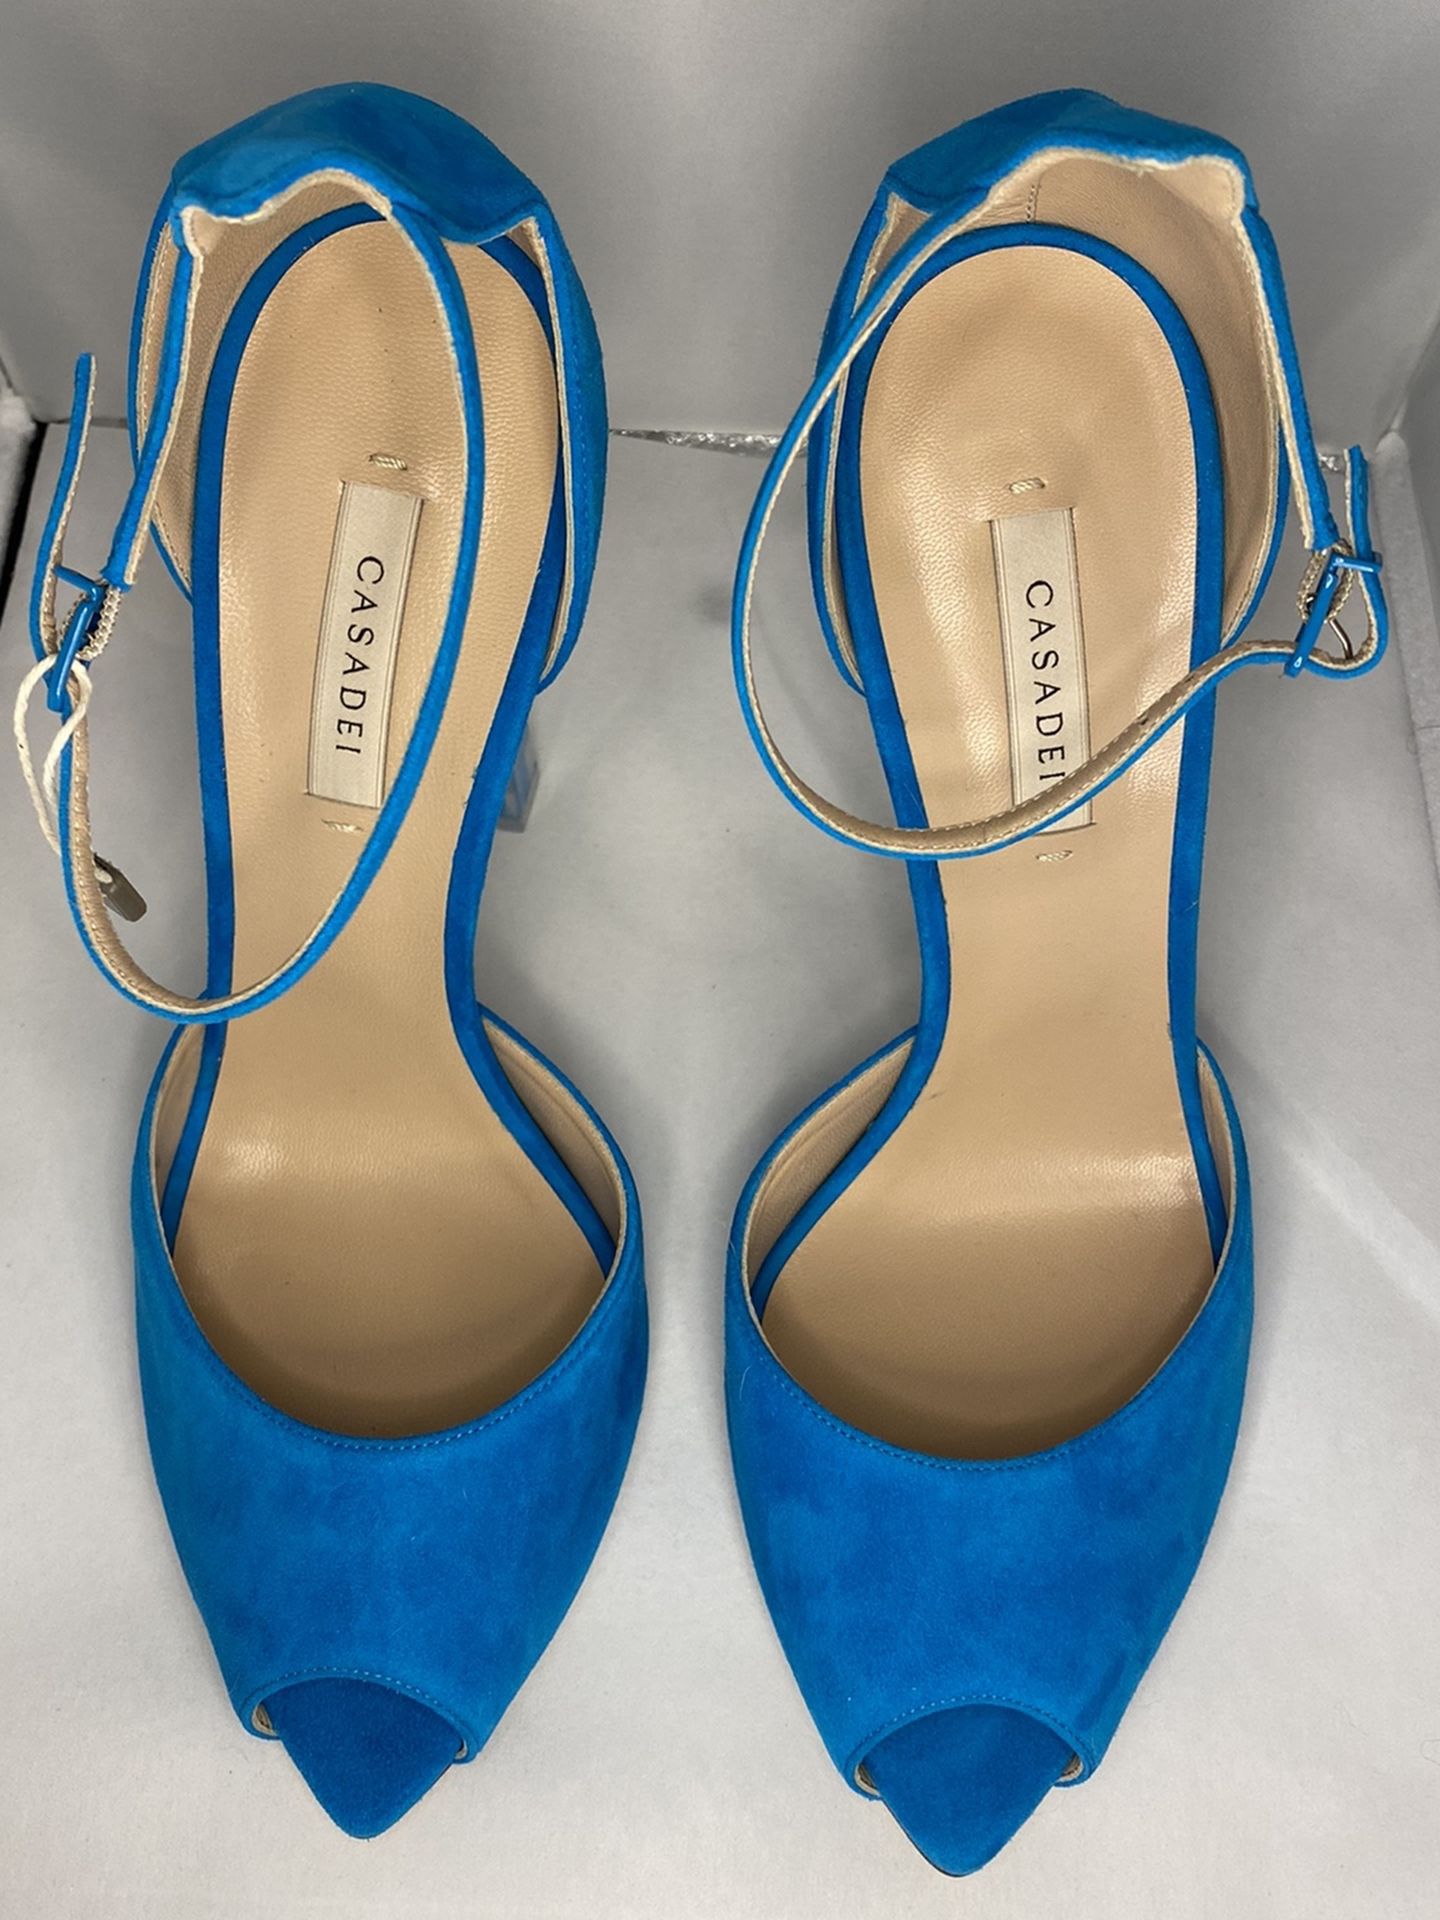 Authentic Casadei Sandals in Turquoise color New with box, dust bag and a pair of heel tips